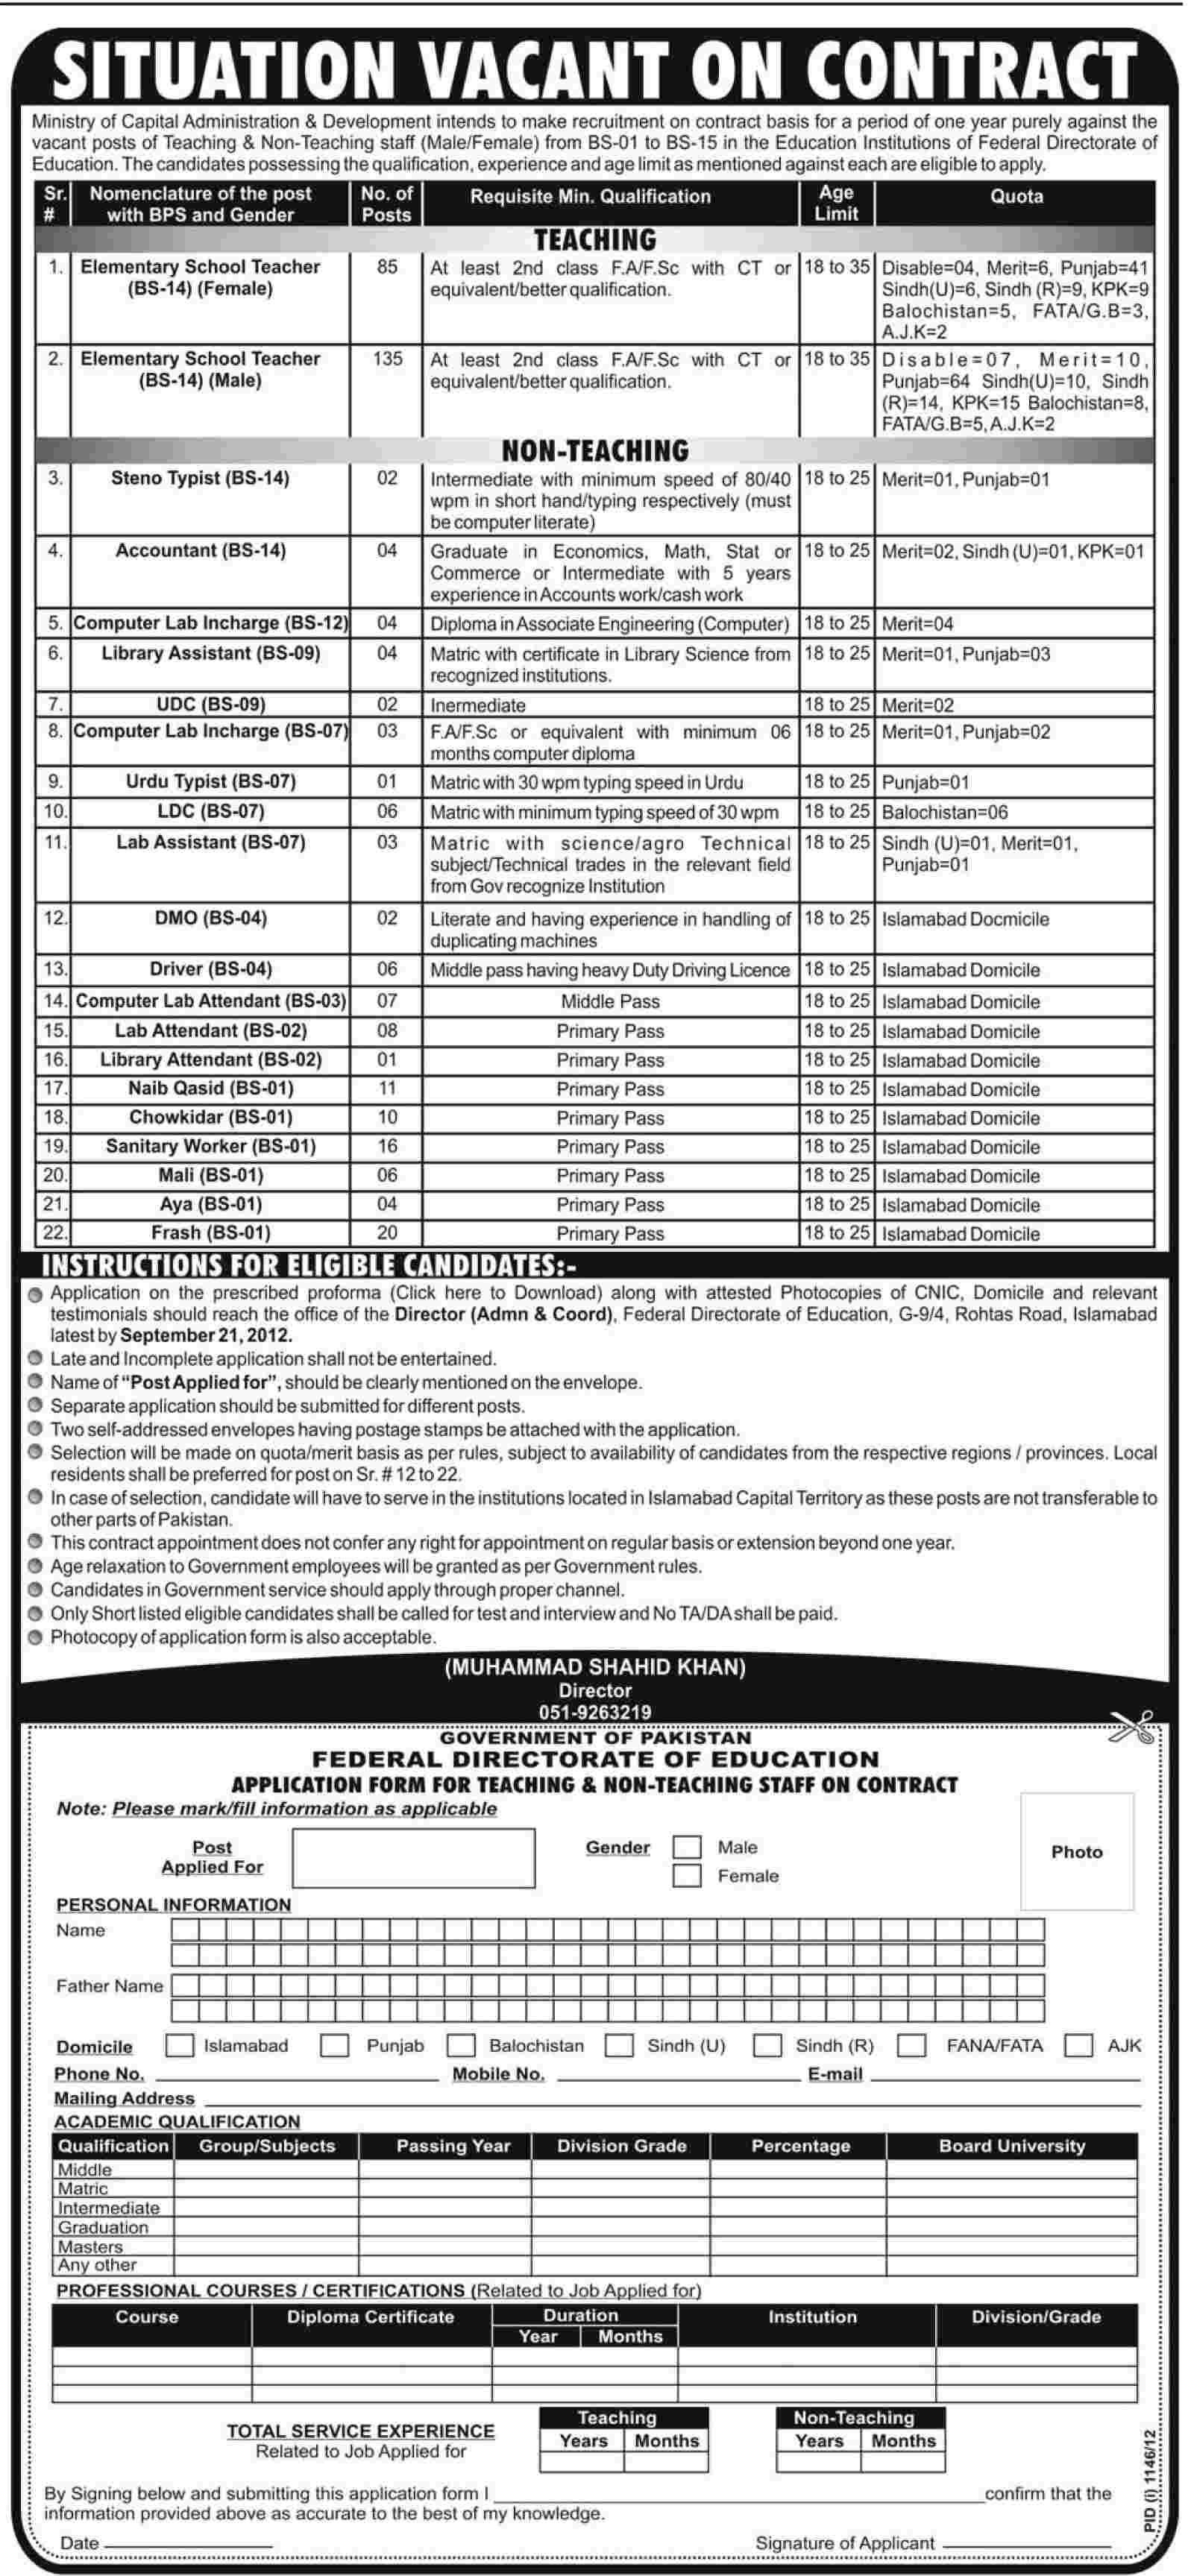 Ministry of Capital Administration and Development Jobs (Government Job)